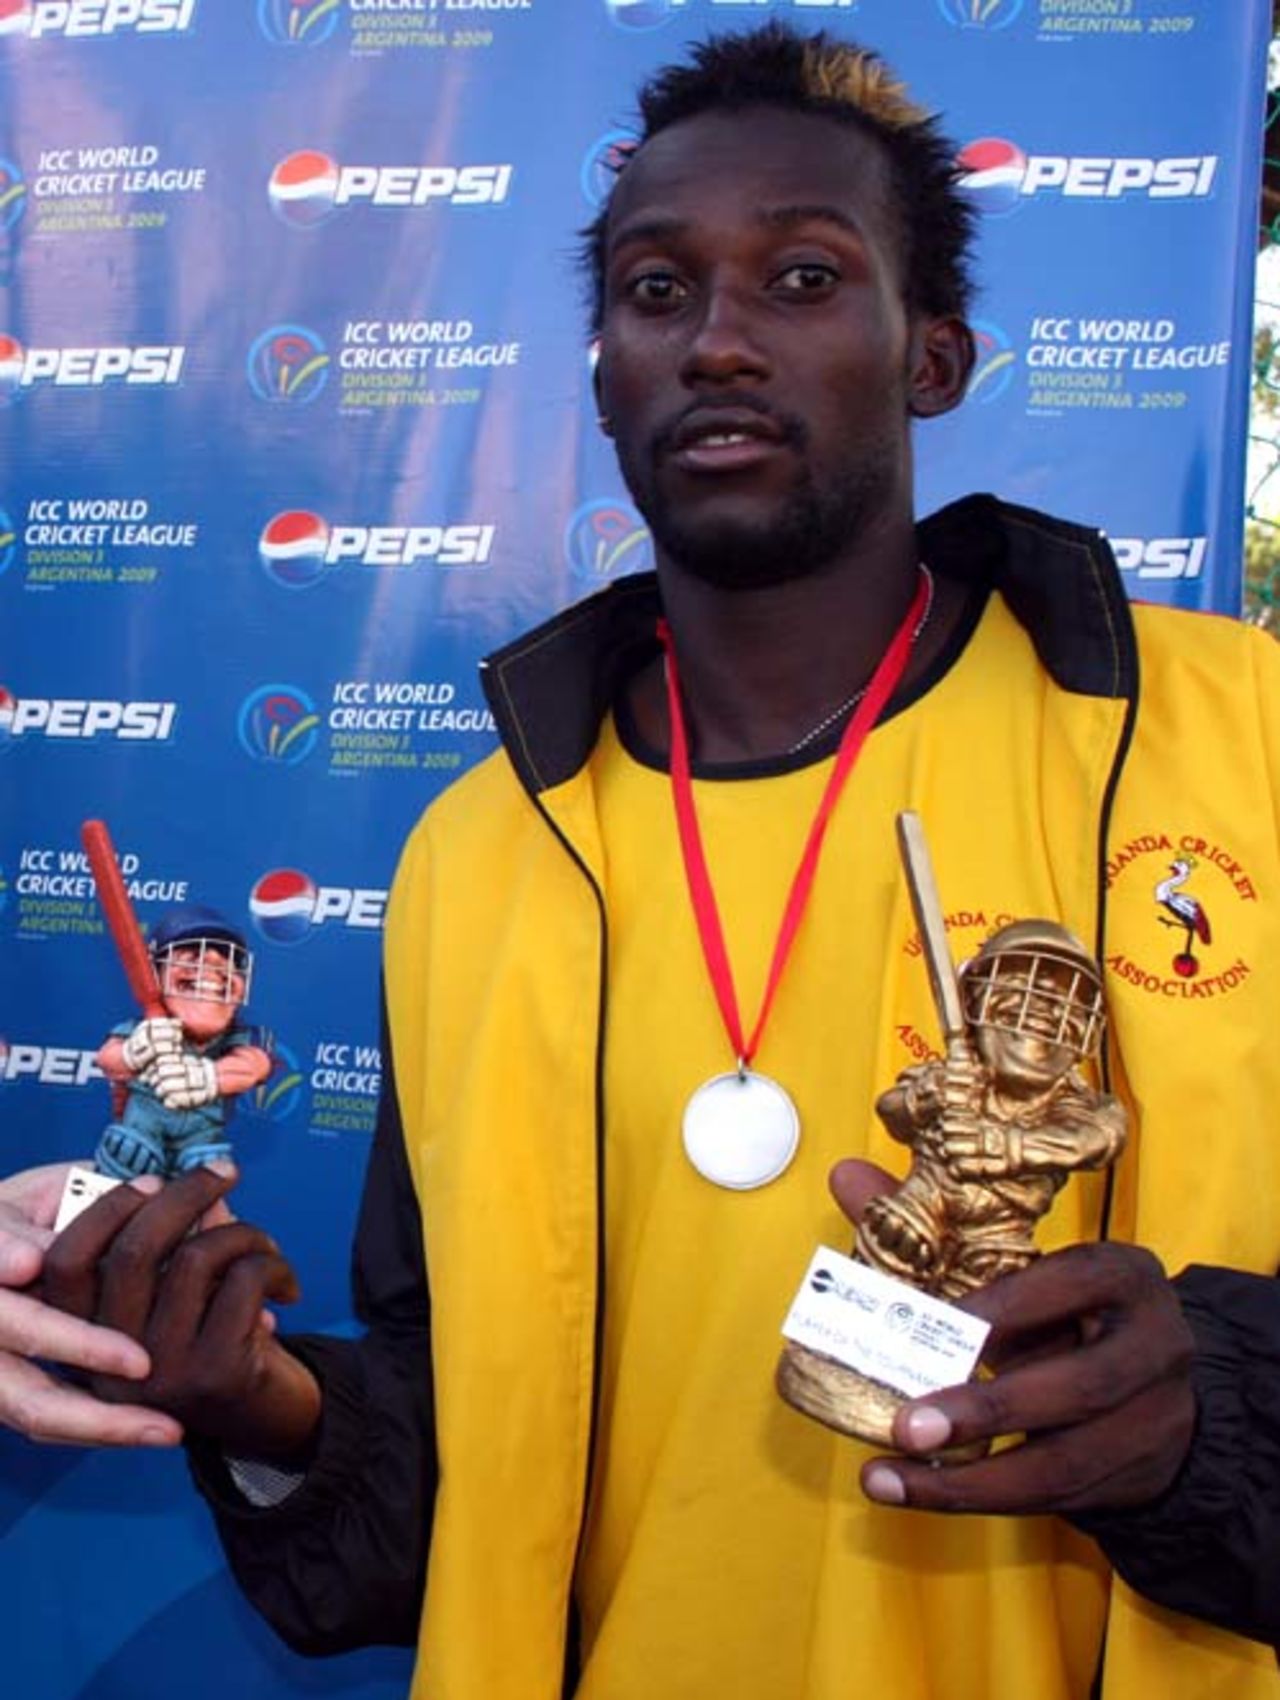 Uganda's Kenneth Kamuya was named Player of the Match and Player of the Tournament, Argentina v Uganda, World Cricket League Division 3, Buenos Aires, January 31, 2009